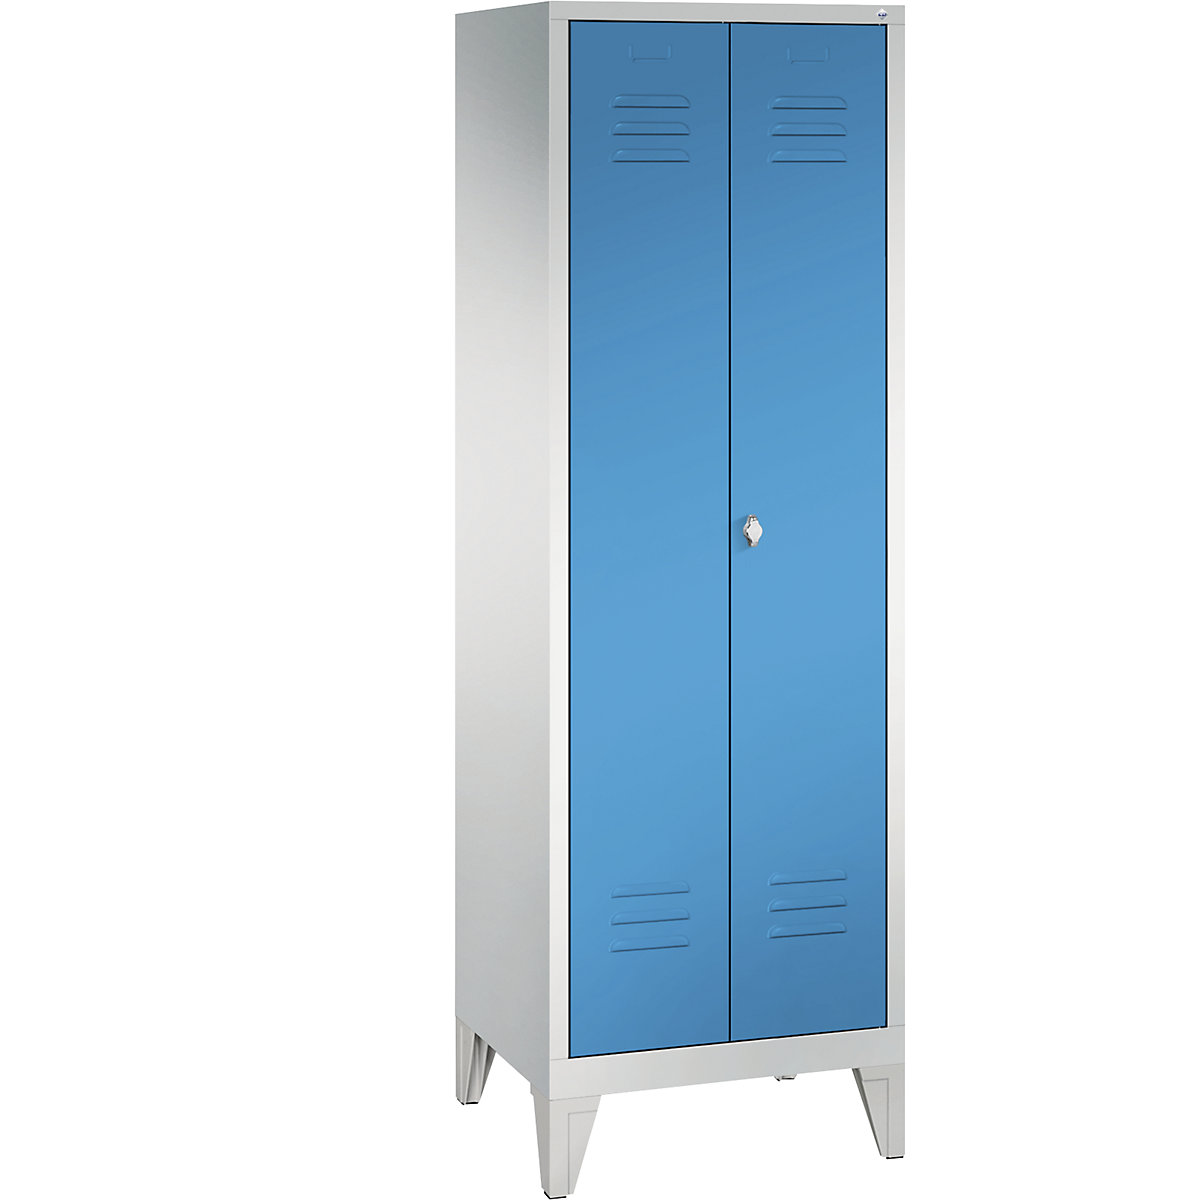 CLASSIC equipment cupboard with feet – C+P, 2 compartments, compartment width 300 mm, light grey / light blue-10